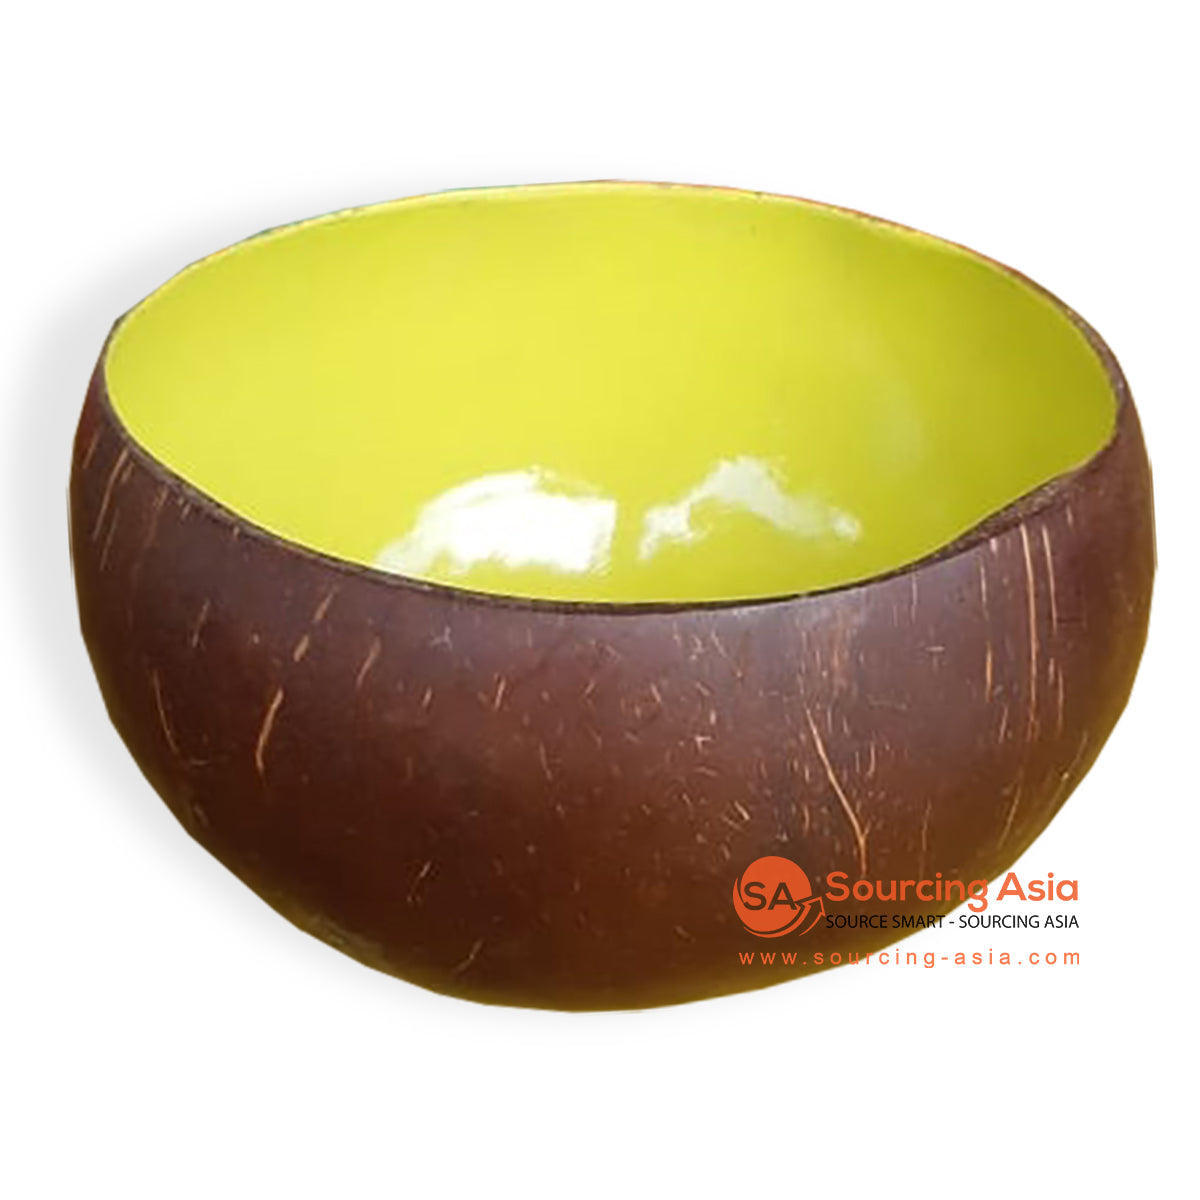 IDA002 NATURAL COCONUT BOWL WITH YELLOW INSIDE